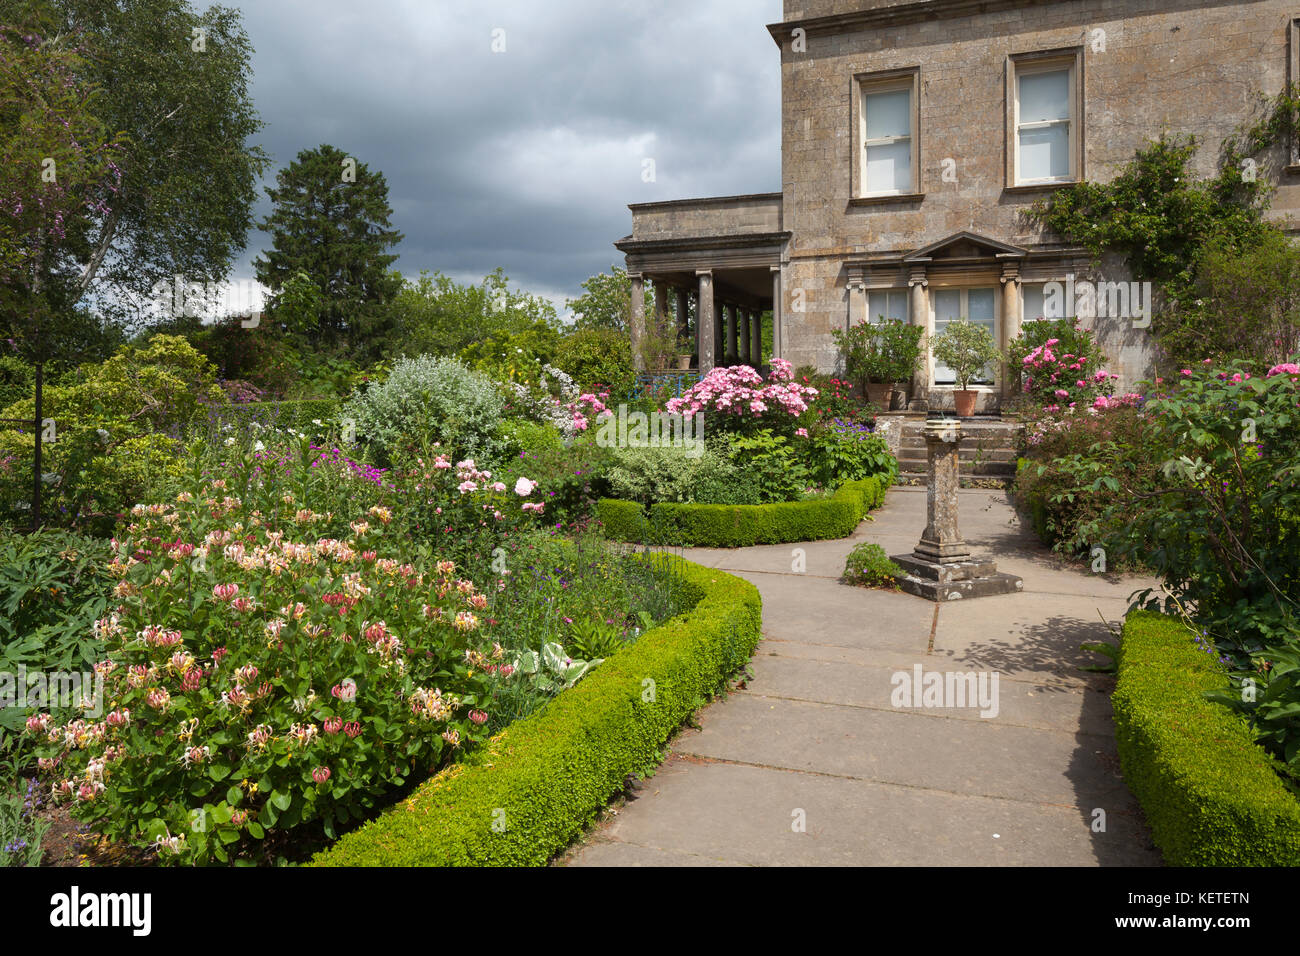 The Four Squares garden and Terrace in June, Kiftsgate Court, Chipping Campden, Cotswolds, Gloucestershire, England Stock Photo